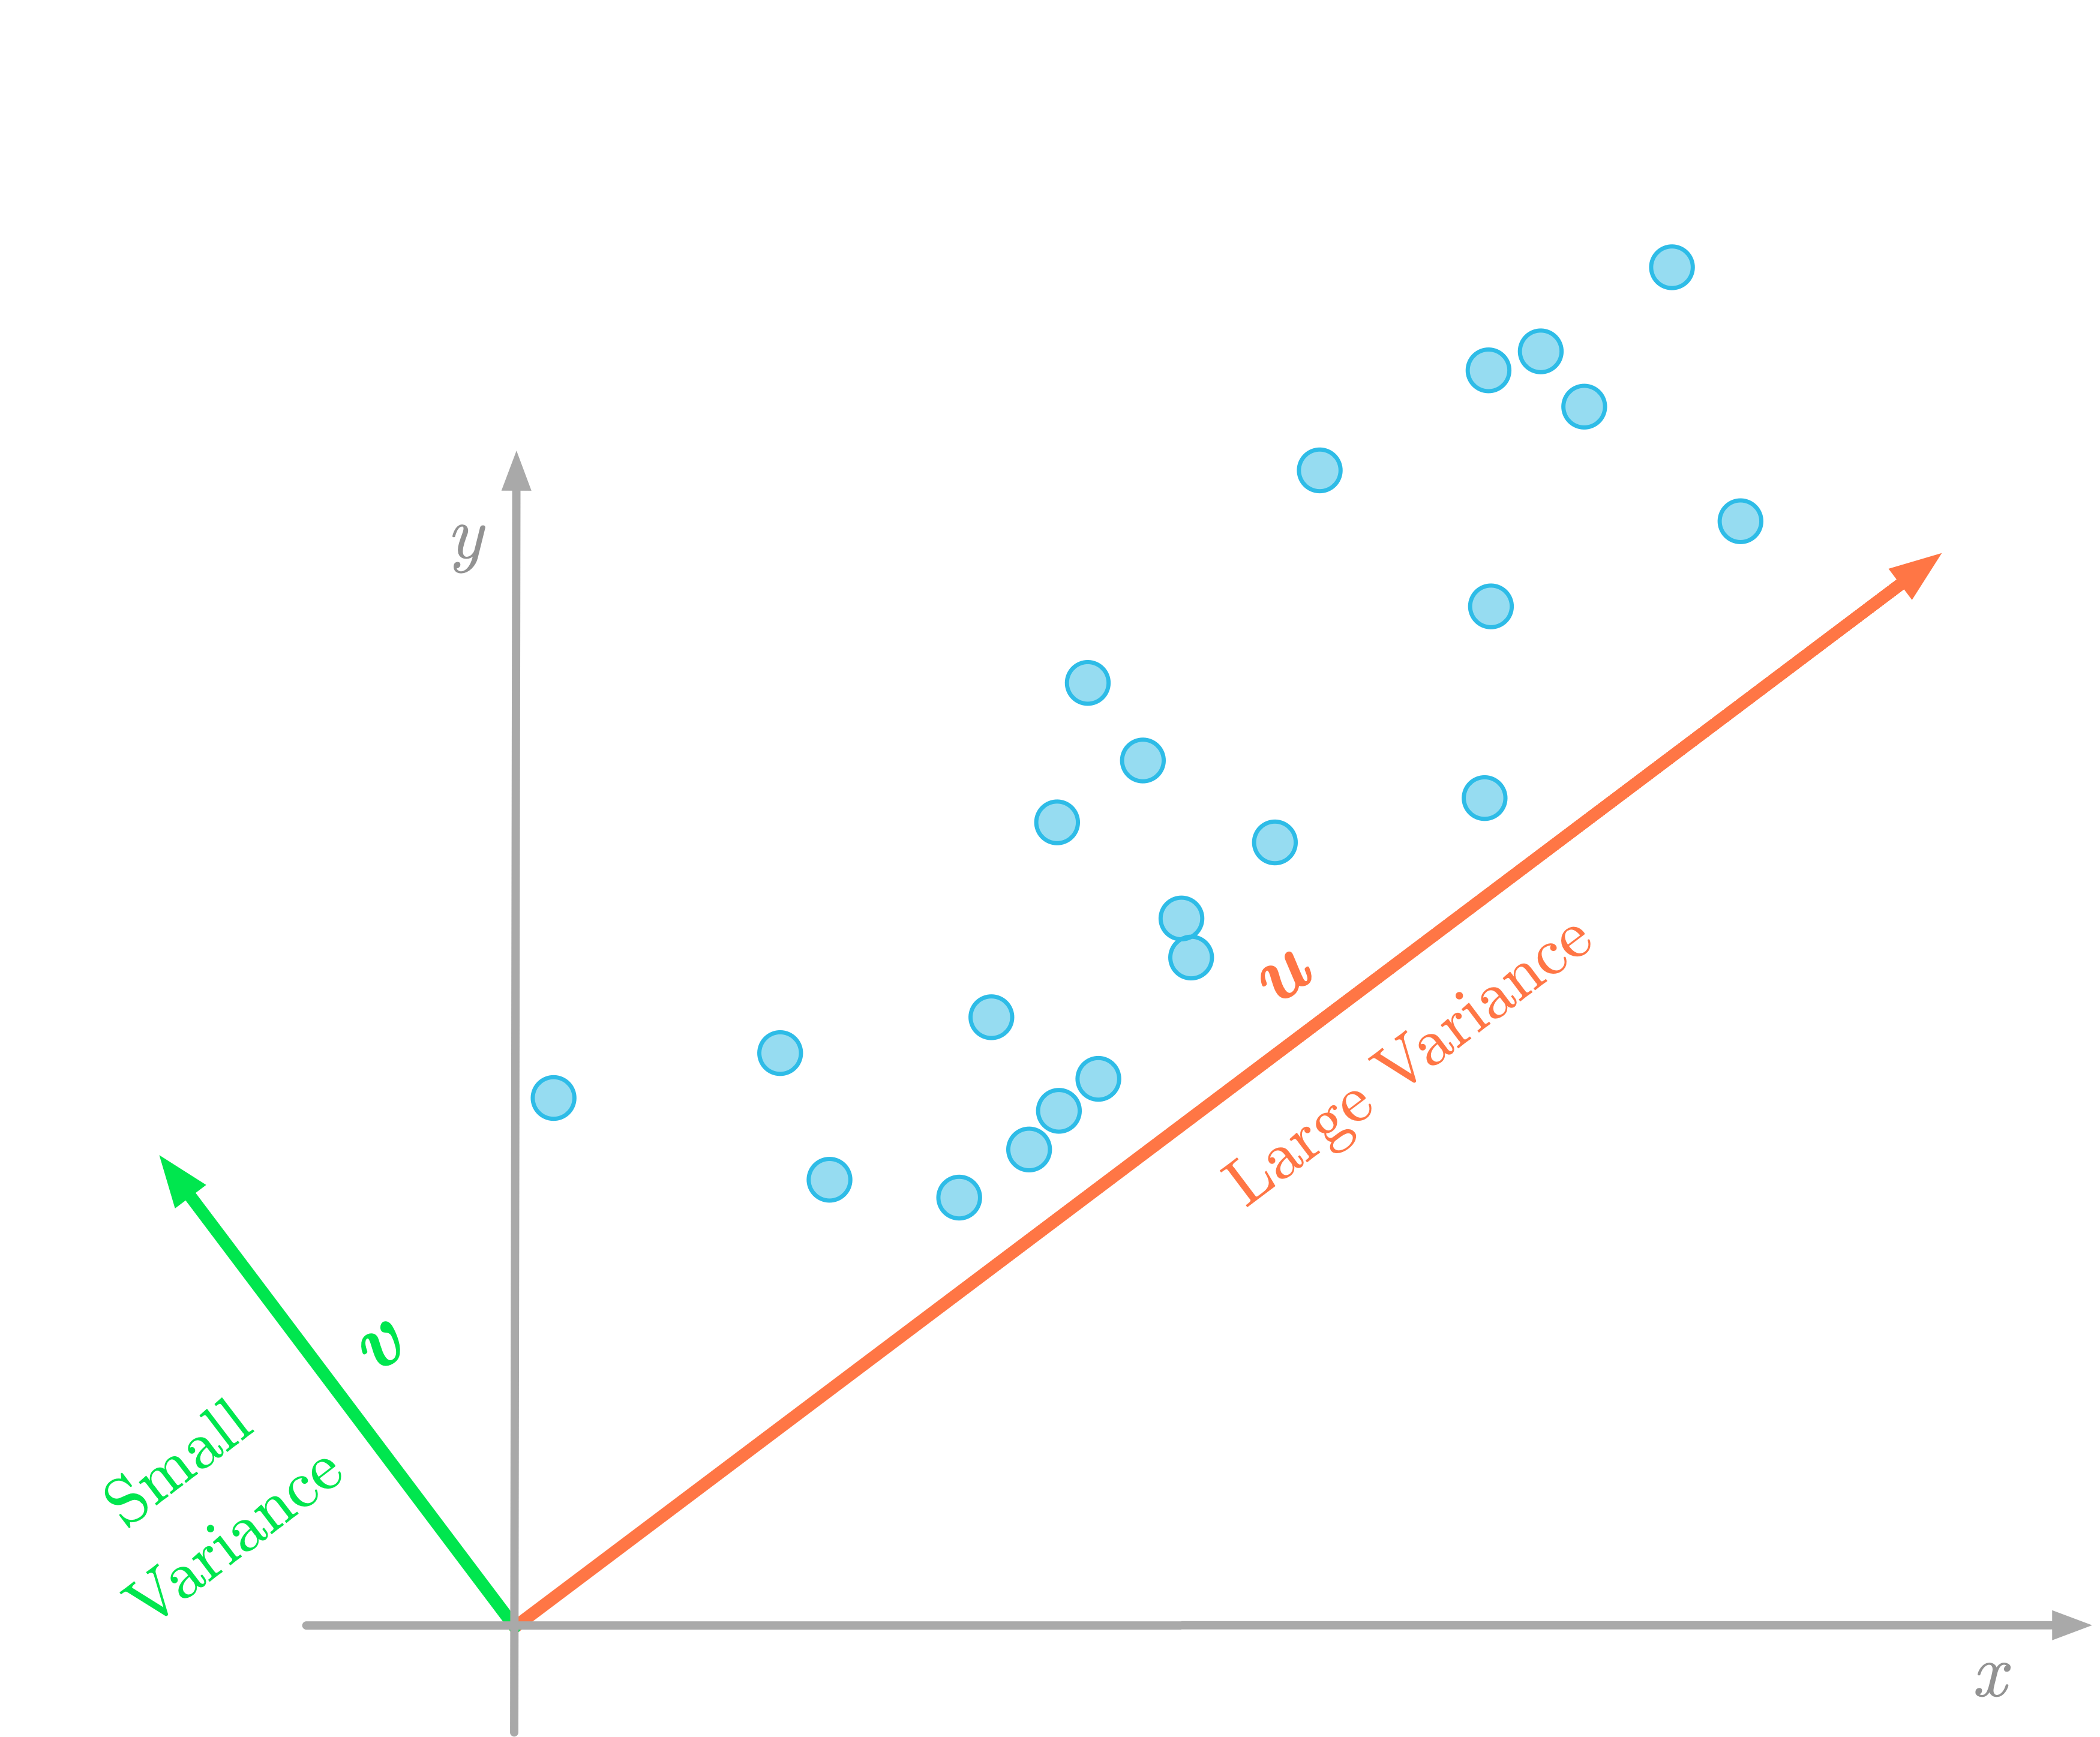 Figure 3: The variance of the data (data samples are represented in blue) according to the direction of the vector $\vu$ (red) is associated with a large variance, while the direction of the vector $\vv$ (green) is associated with a smaller variance.